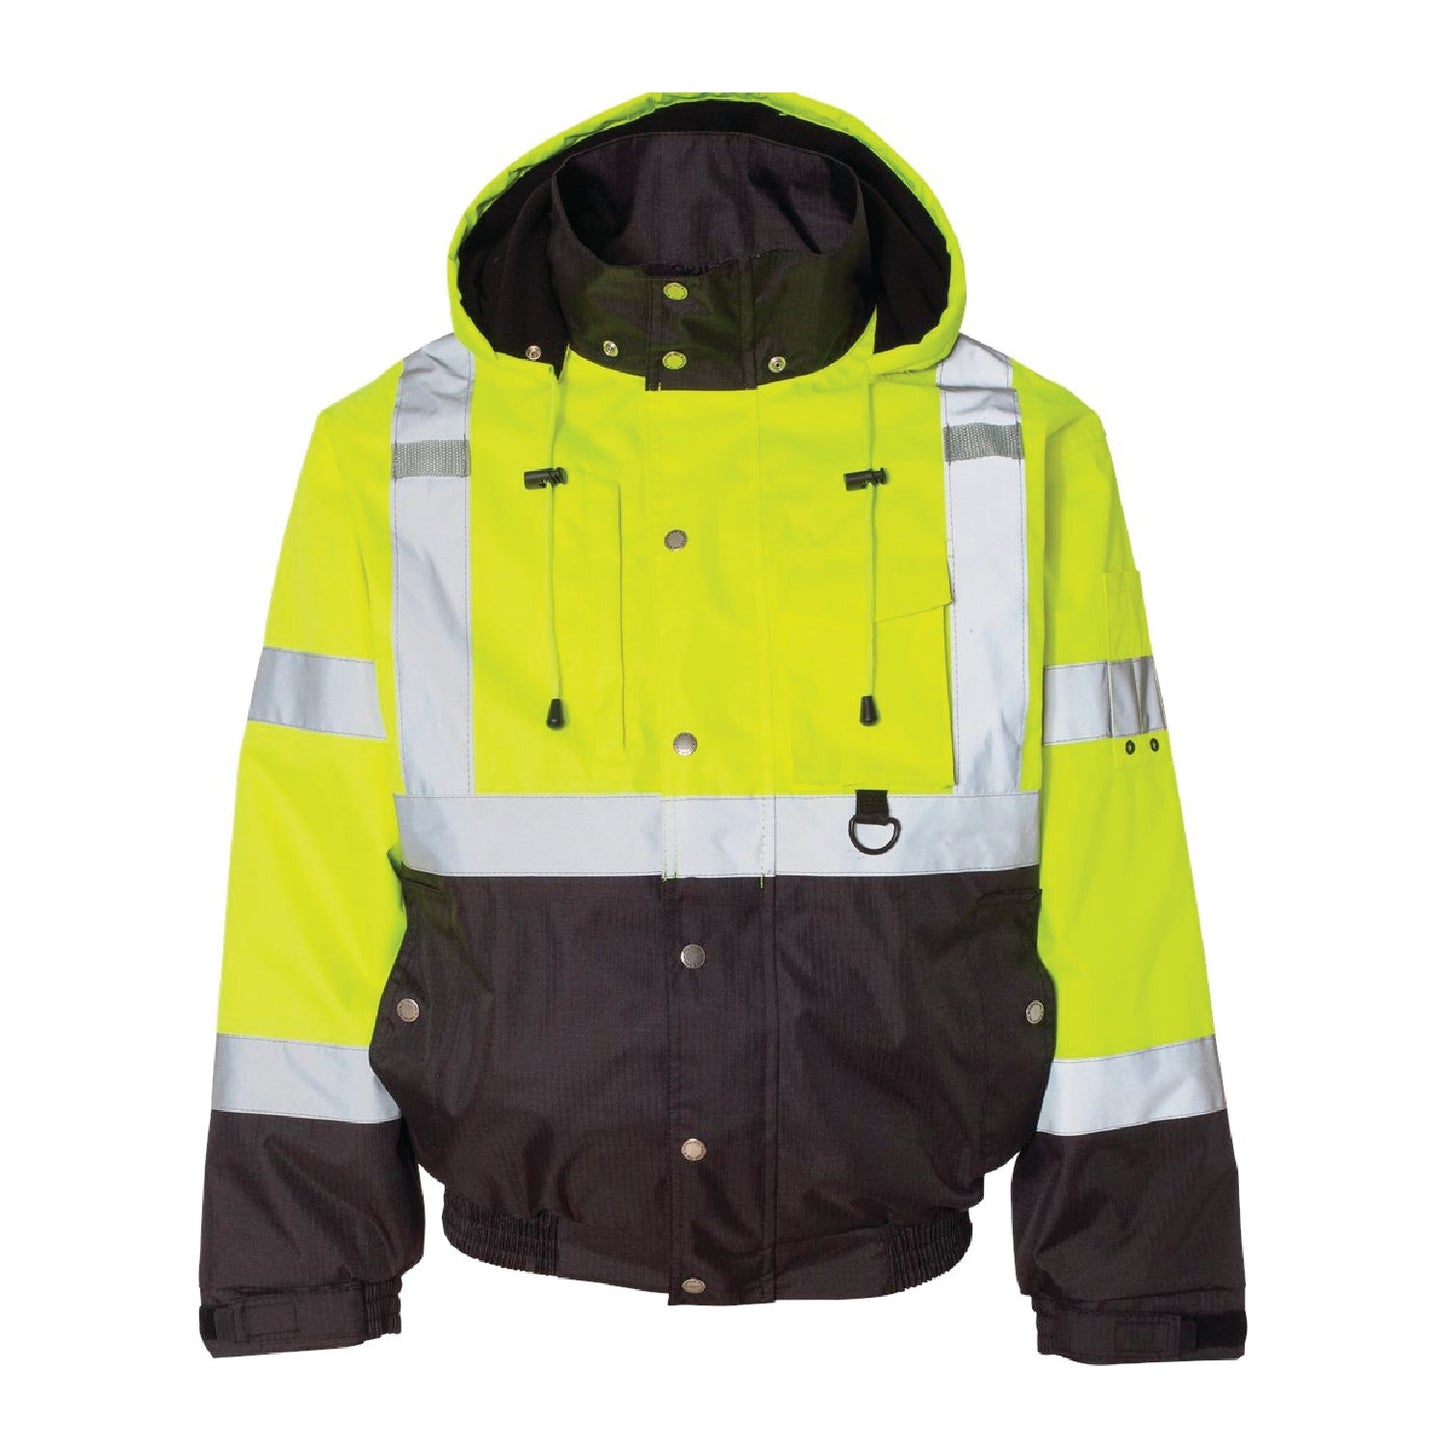 BCI Midweight Safety Jacket - DSP On Demand